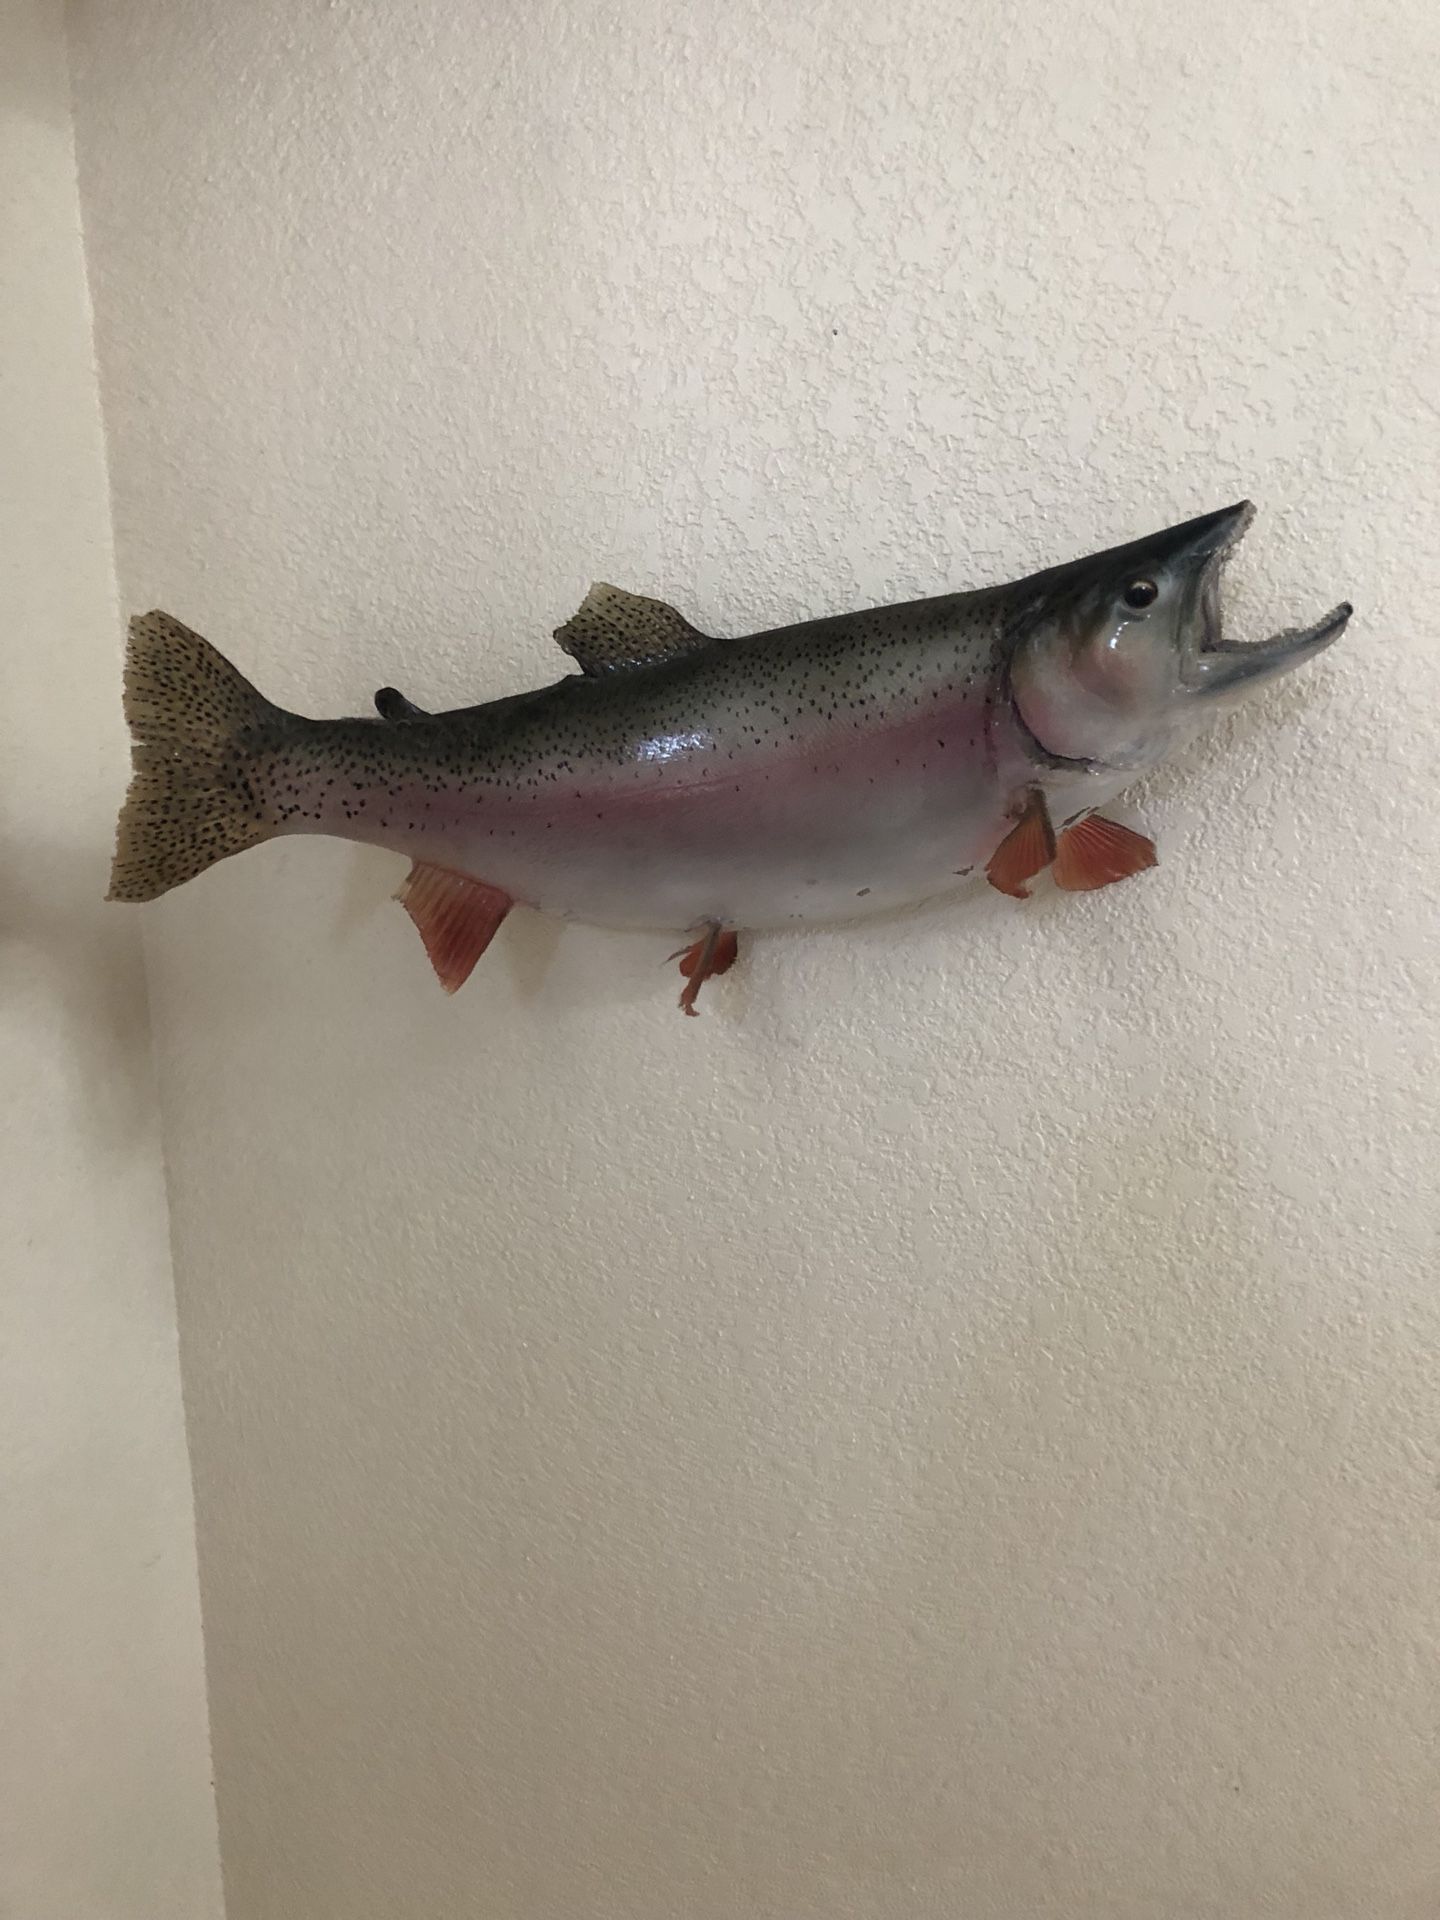 Trout stuffed fish with wall mount